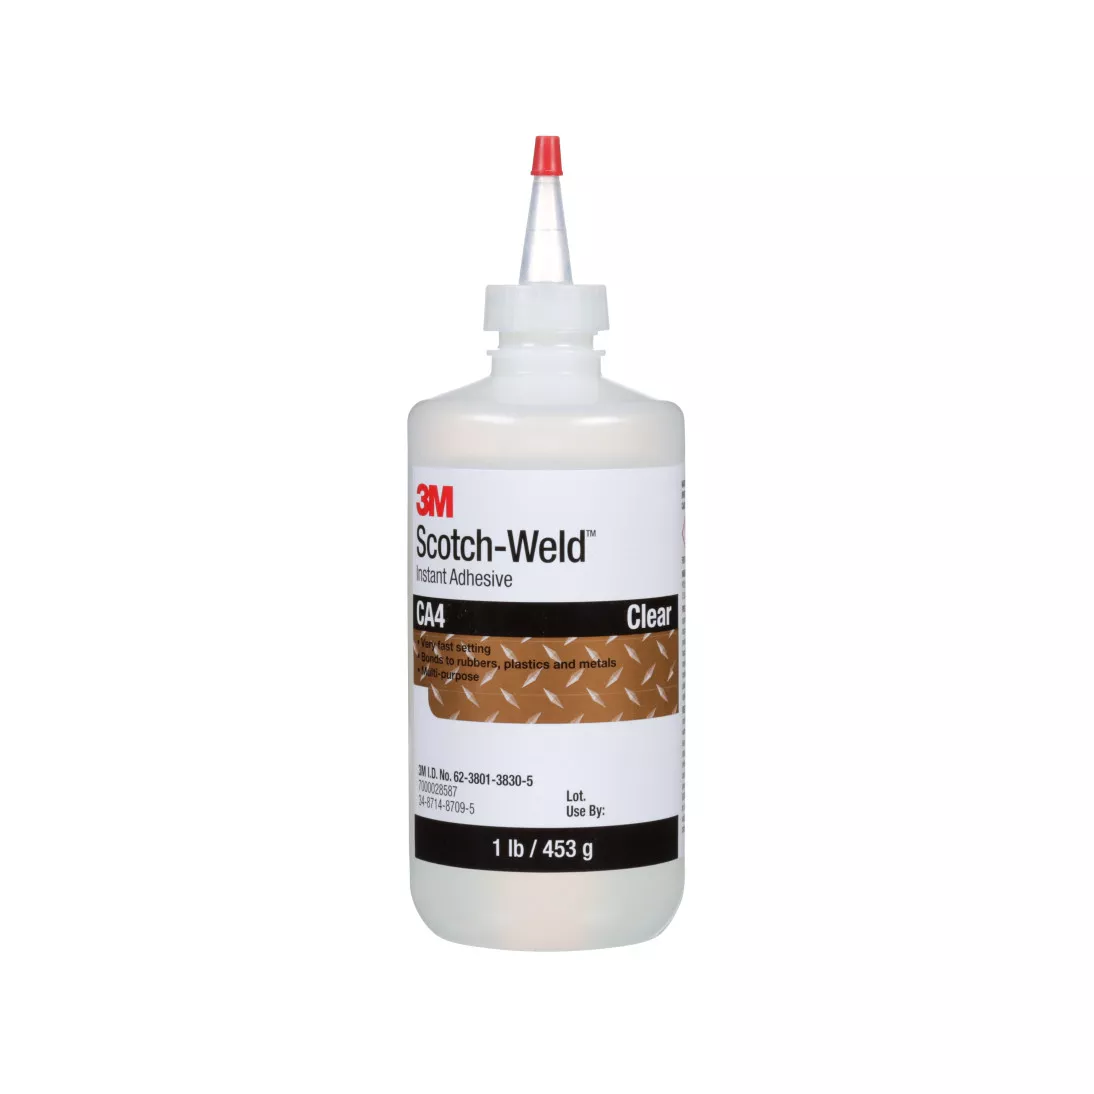 3M™ Scotch-Weld™ Instant Adhesive CA4, Clear, 1 Pound Bottle, 1/case